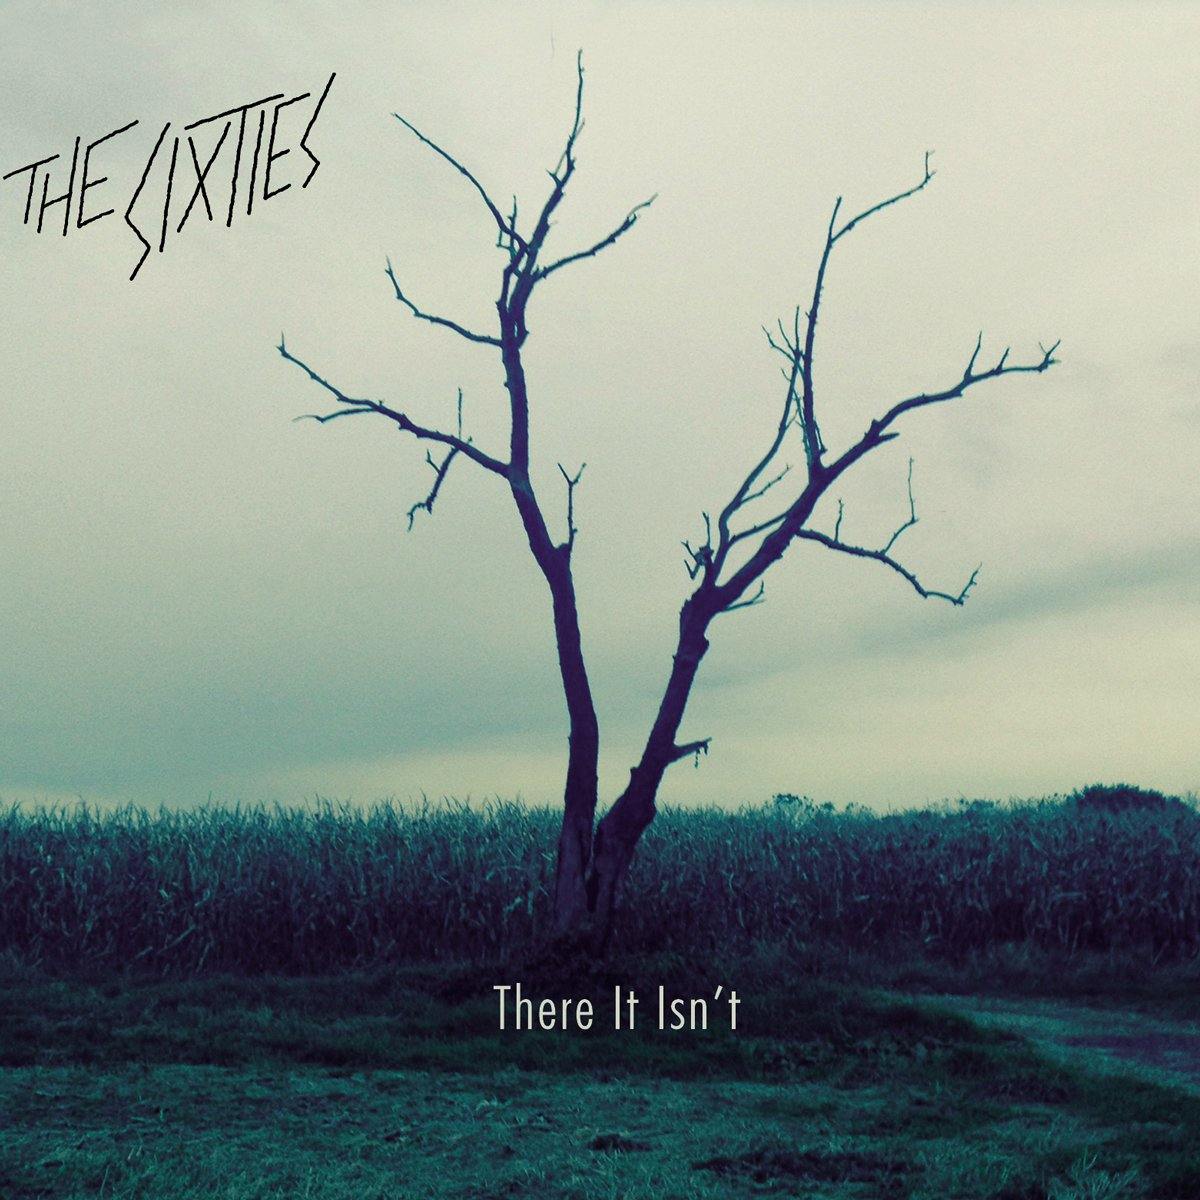 Buy – The Sixties "There It Isn't" Digital Download – Band & Music Merch – Cold Cuts Merch